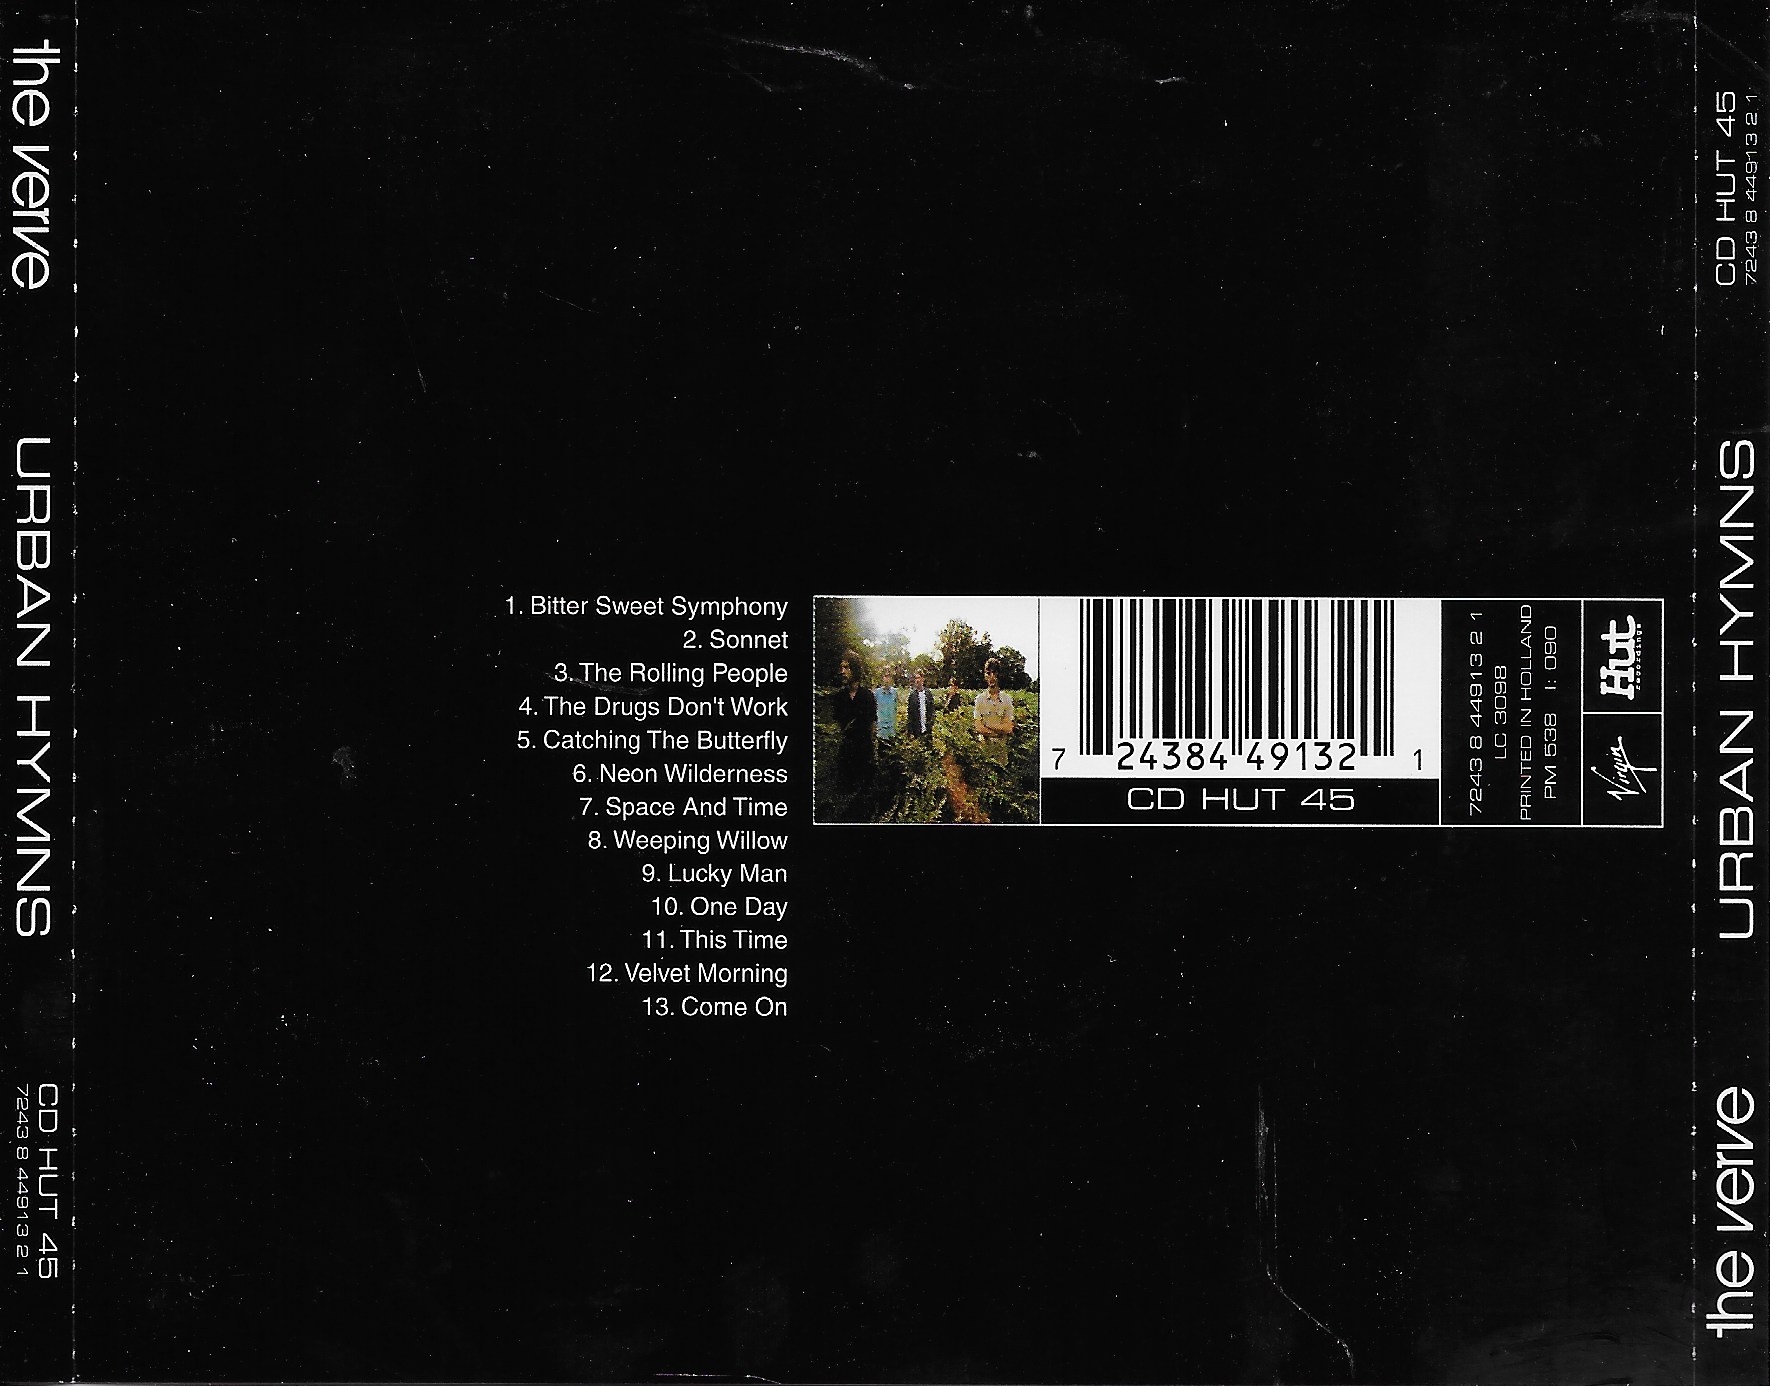 Back cover of CD HUT 45